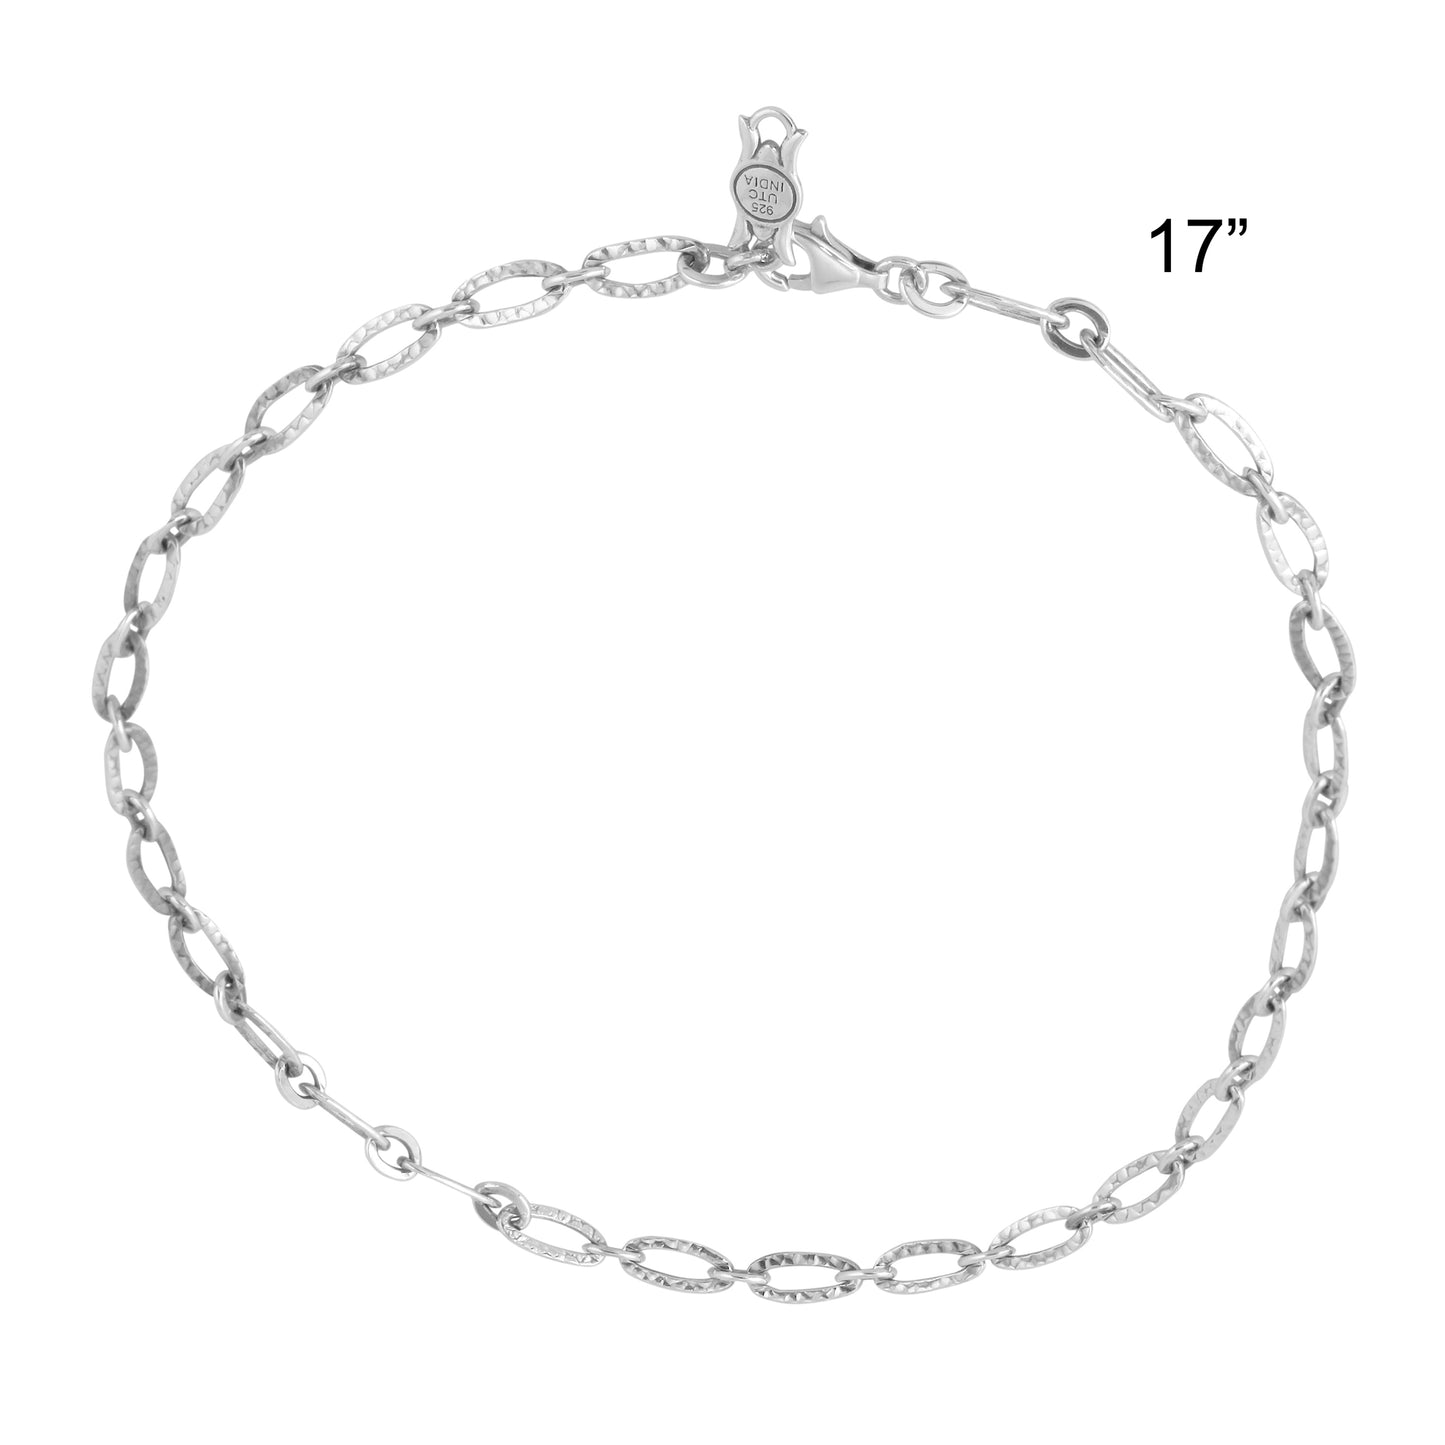 Sterling Silver Polished Oval Link Chain Necklace, 17 Inch or 20 Inch Length